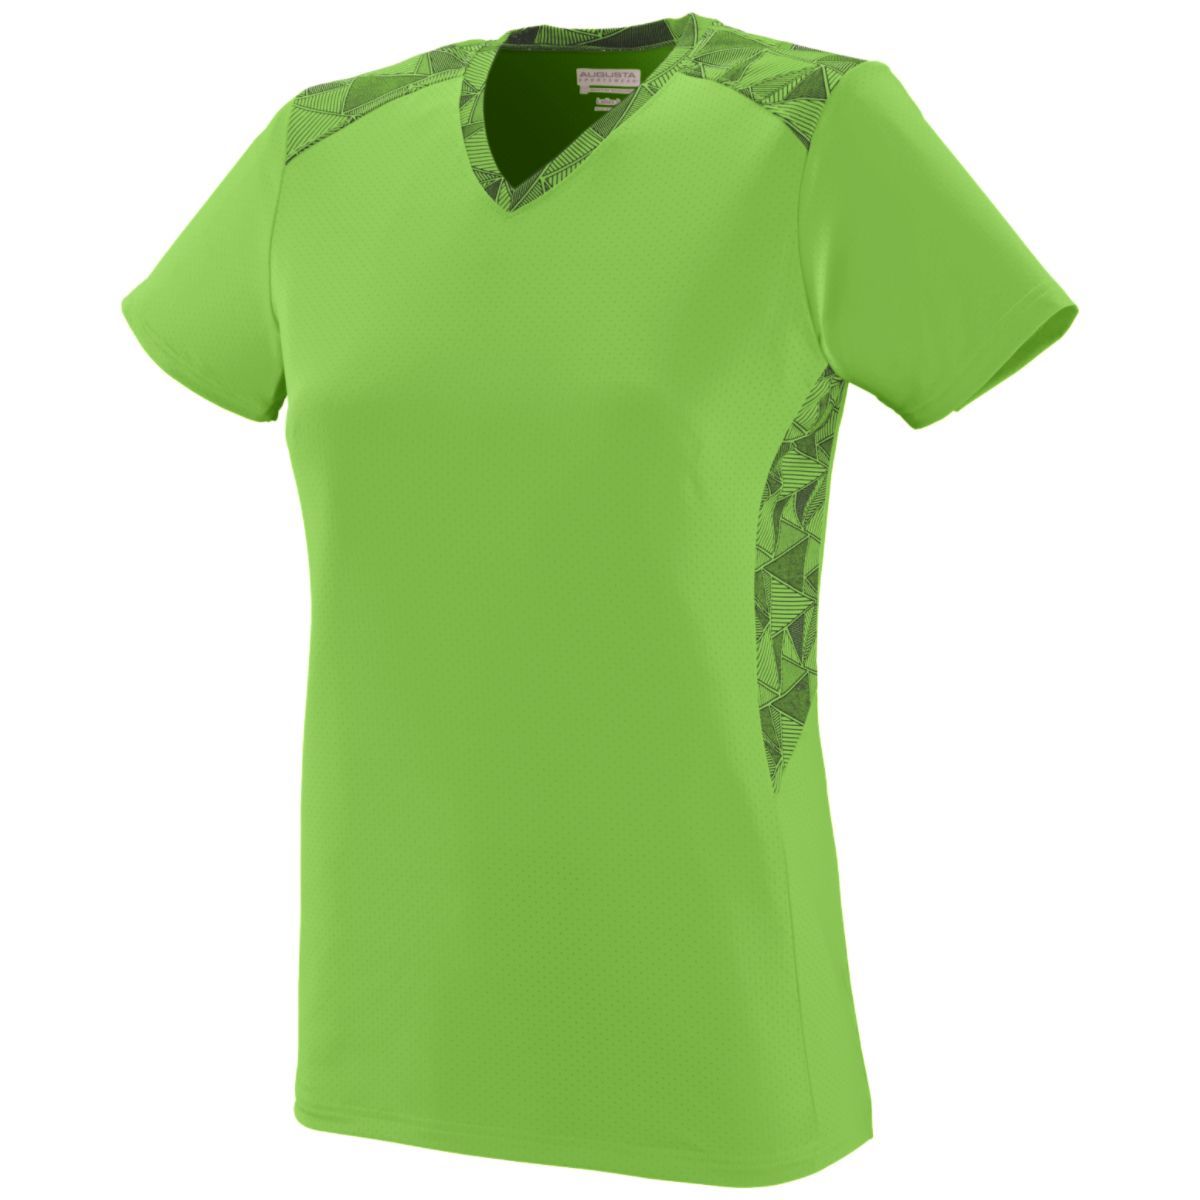 Augusta Sportswear Ladies Vigorous Jersey in Lime/Lime/Black Print  -Part of the Ladies, Ladies-Jersey, Augusta-Products, Softball, Shirts product lines at KanaleyCreations.com